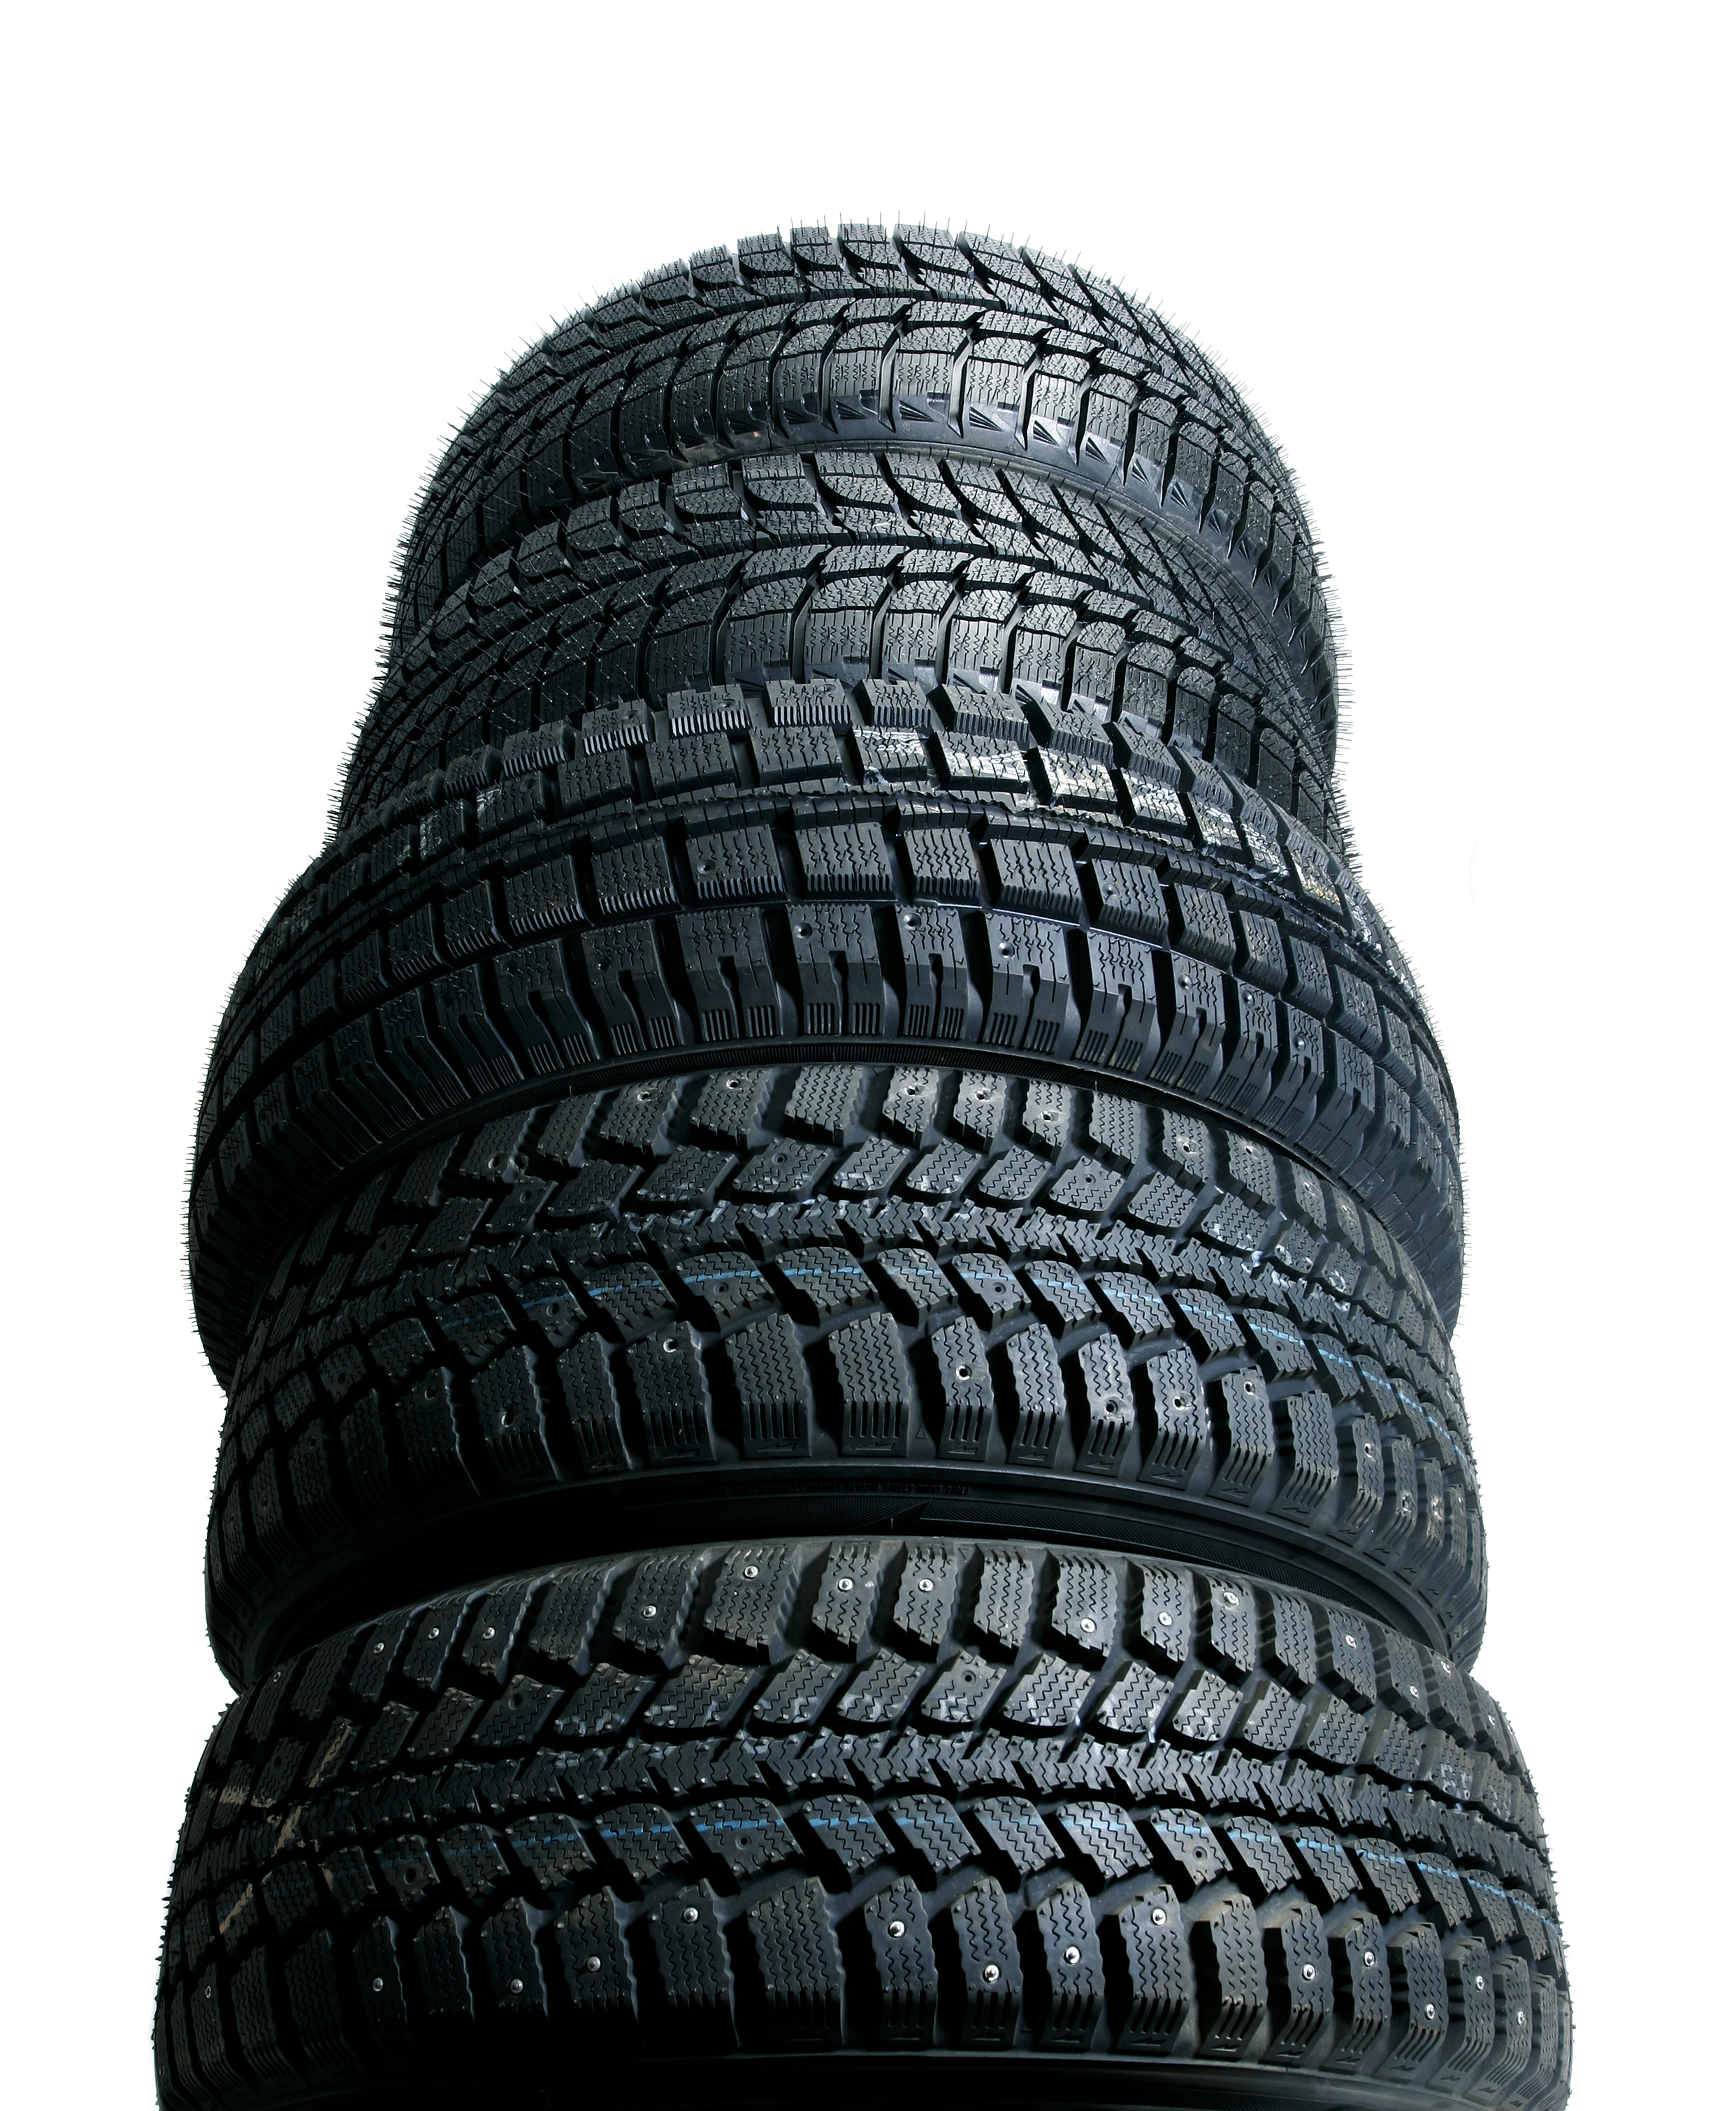 Brand new tires stacked up and isolated on white background - worms view